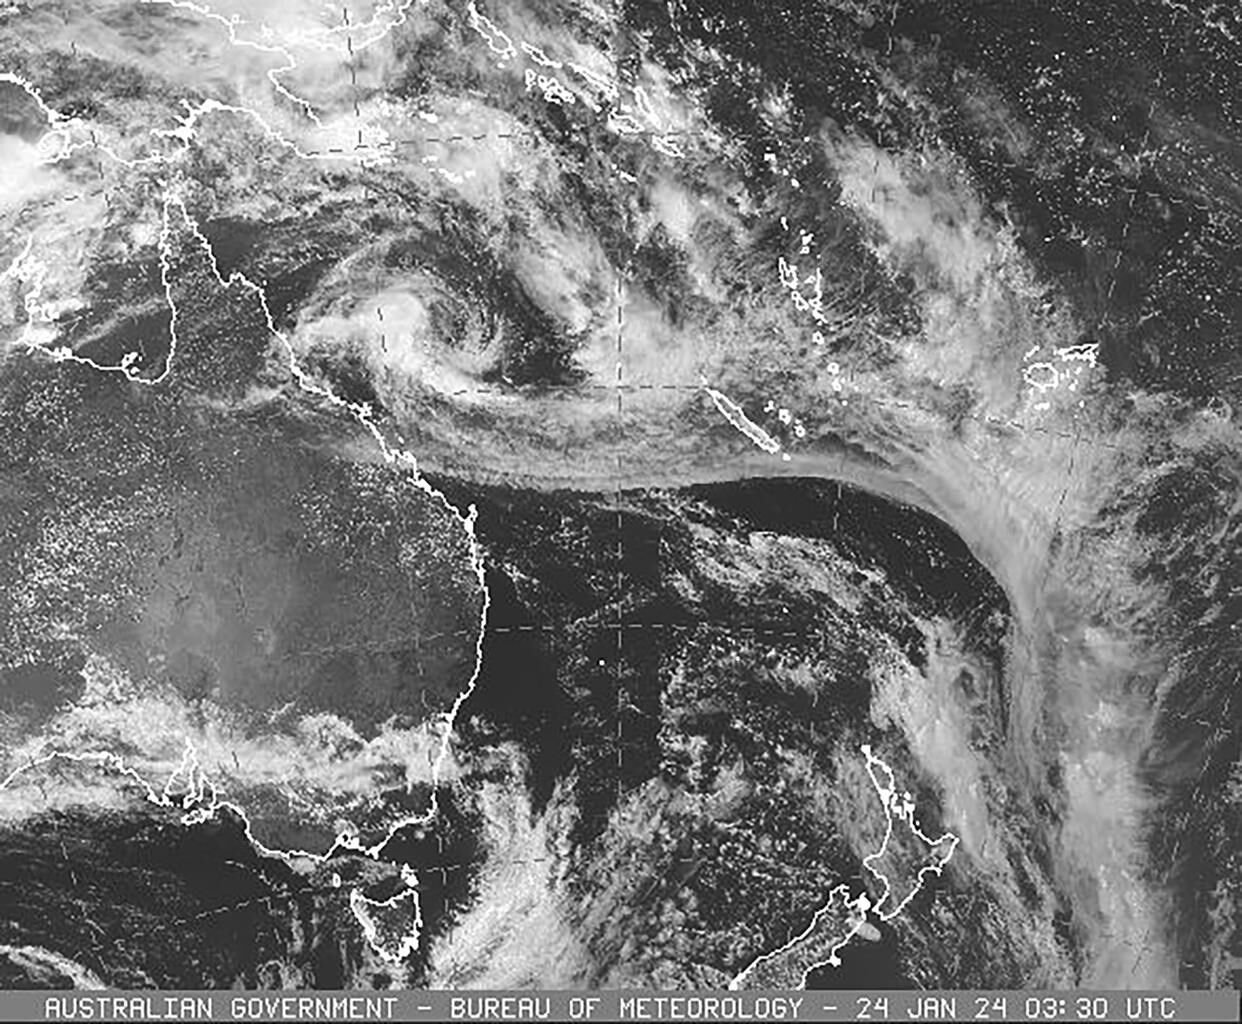 Tropical low off northeast Australia expected to become cyclone and dump heavy weekend rains